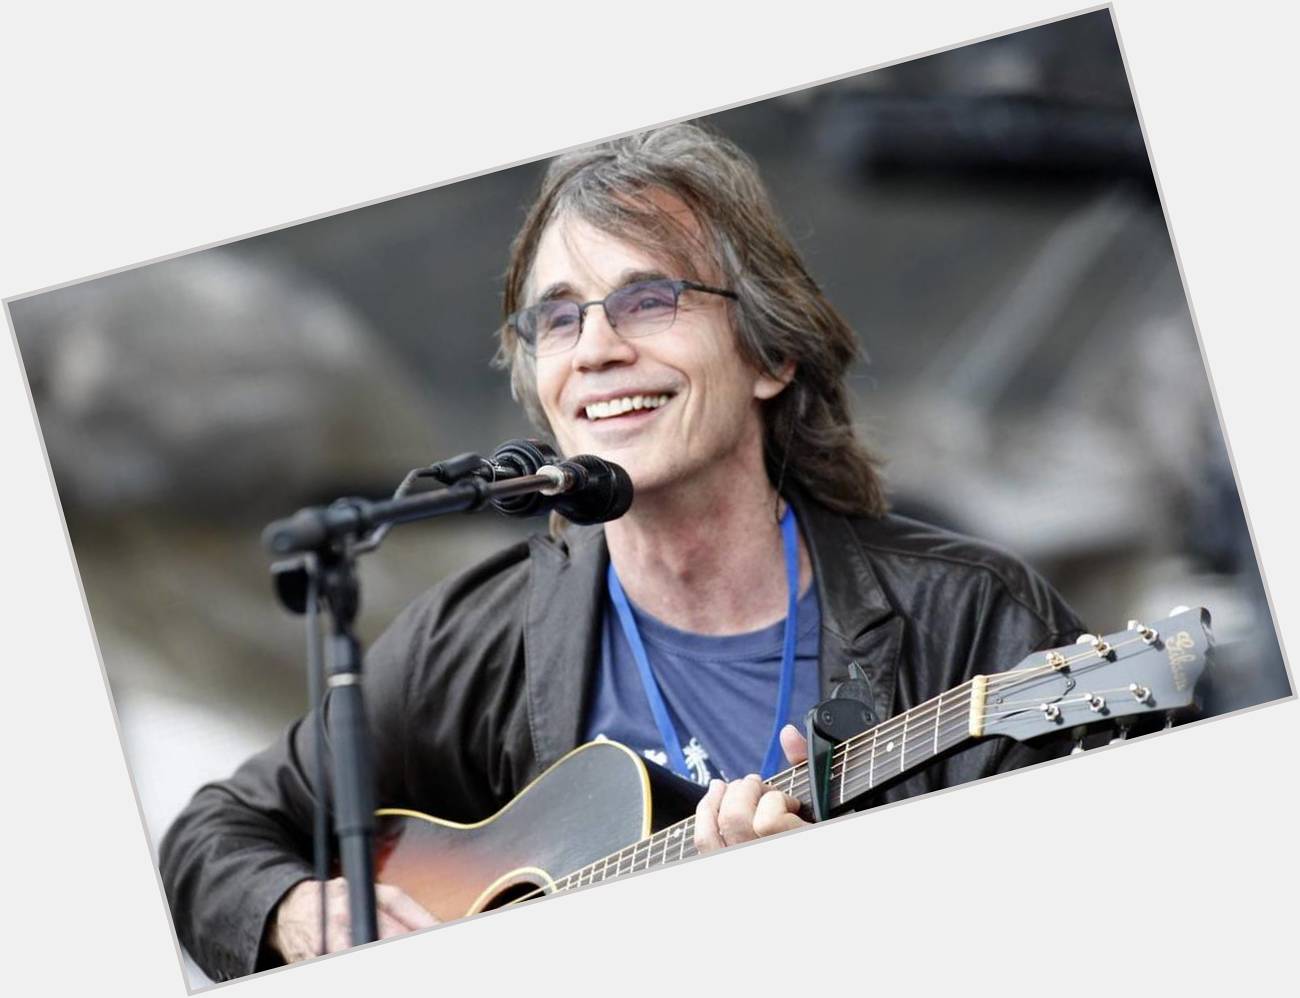 A Big BOSS Happy Birthday today to Jackson Browne from all of us here at The Boss! 